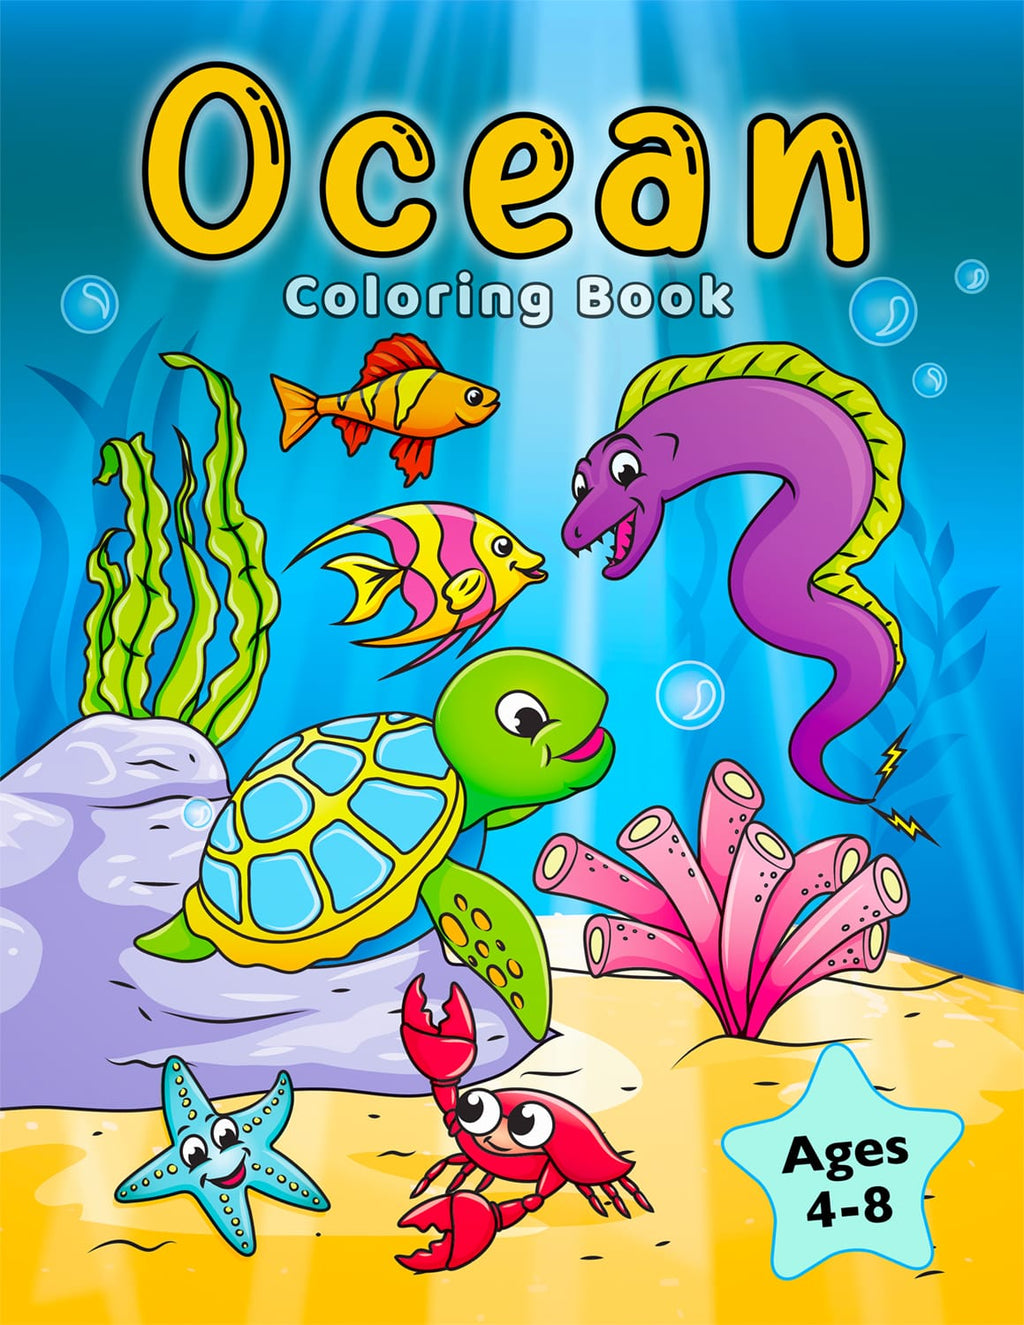 ocean coloring book for kids ages 4-8